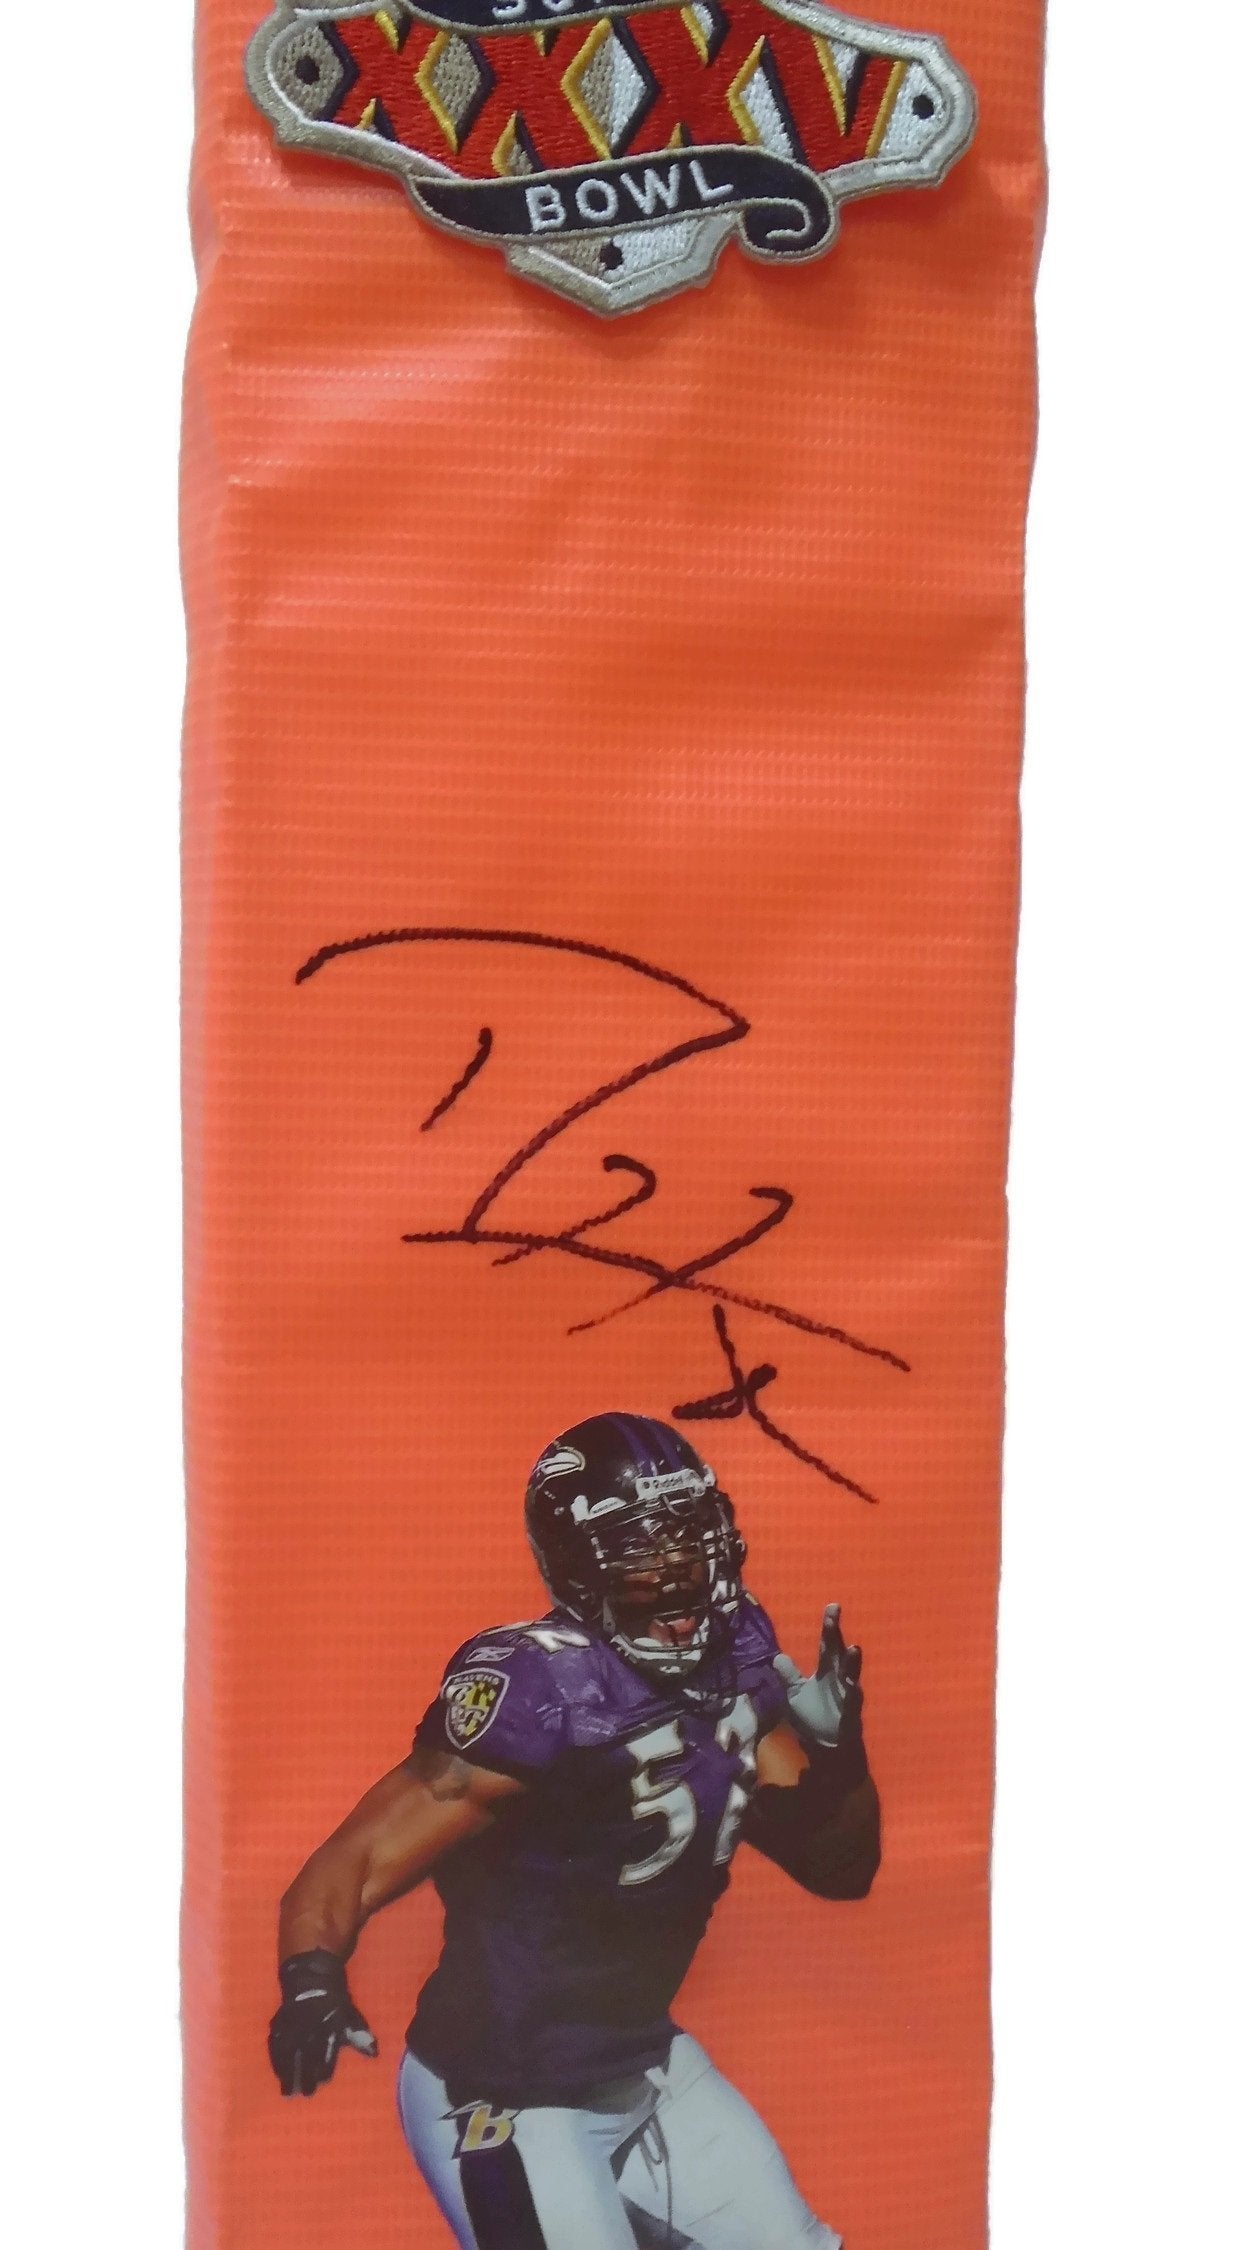 Football End Zone Pylons-Autographed - Ray Lewis Signed Baltimore Ravens Football Pylon Proof Photo Beckett BAS Authentication 104